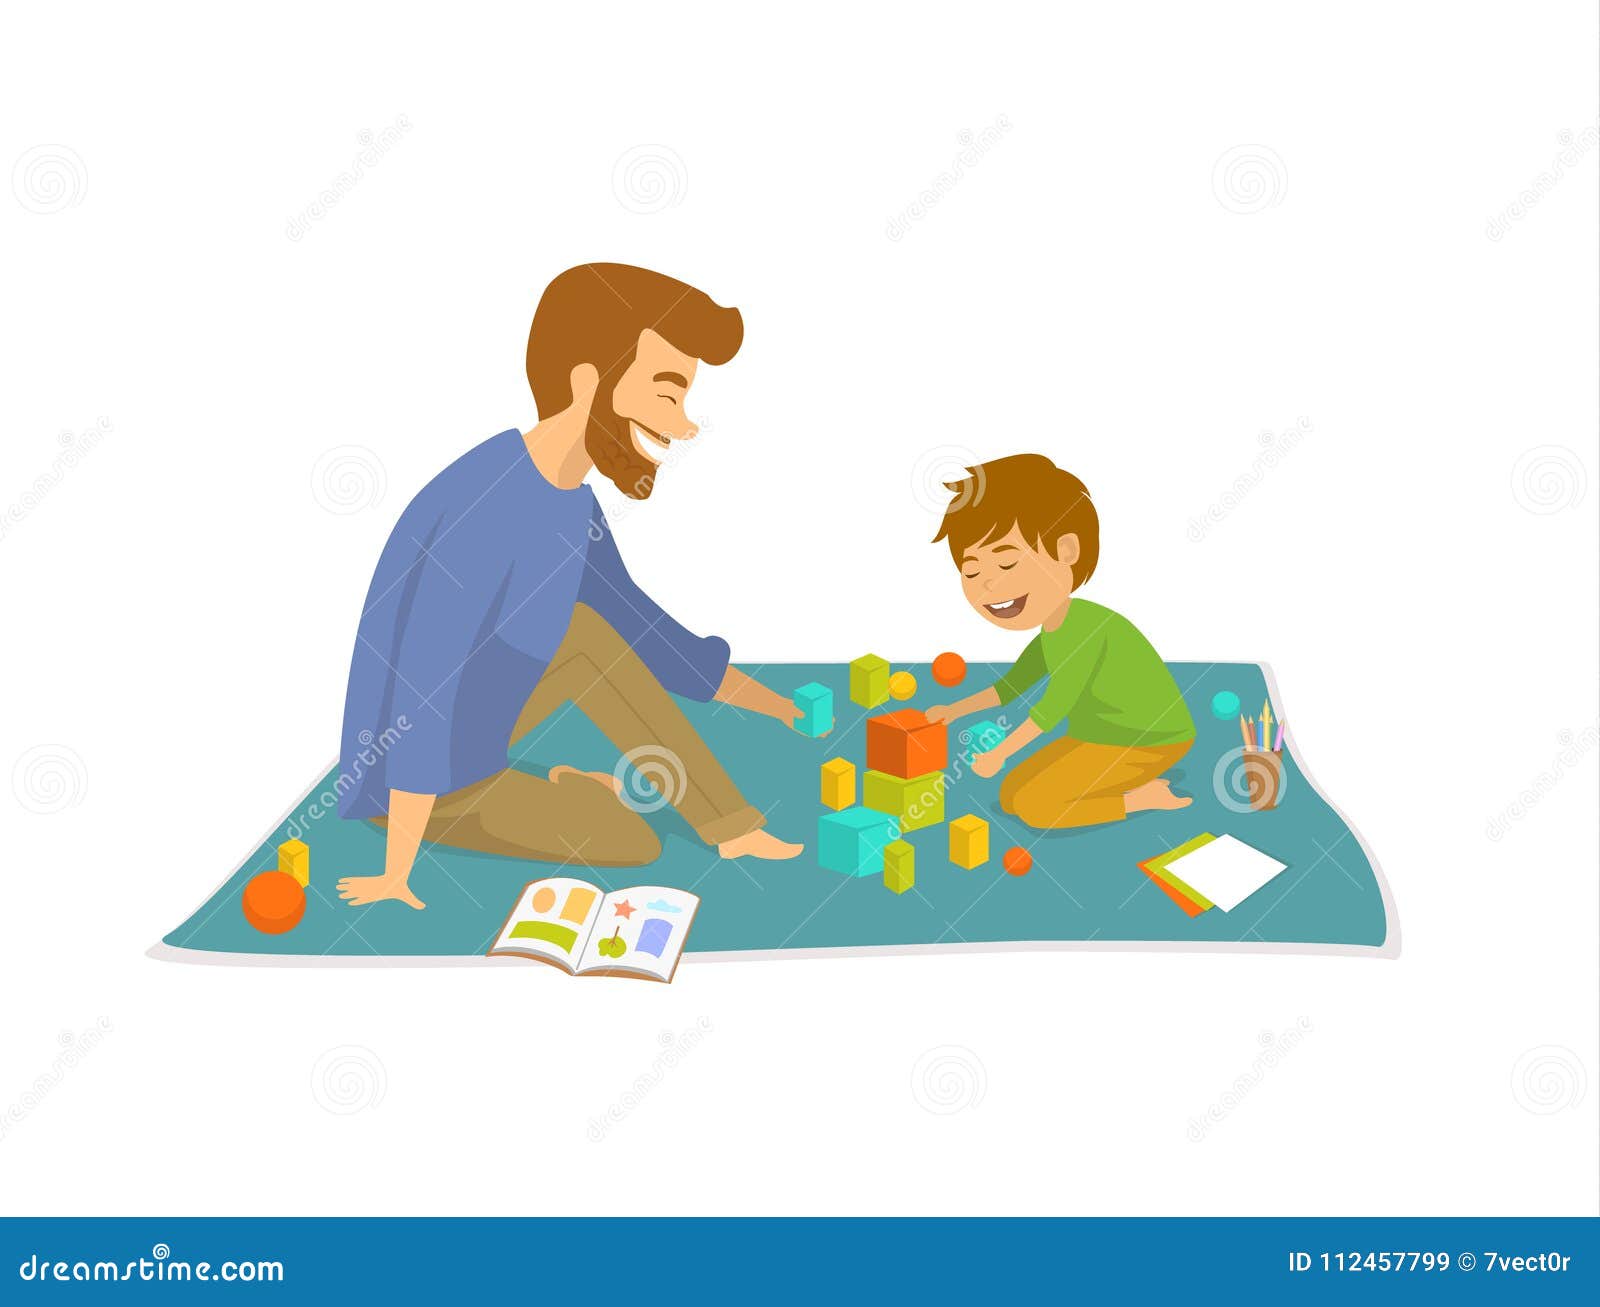 man and boy, father and son palying on floor at home developing games